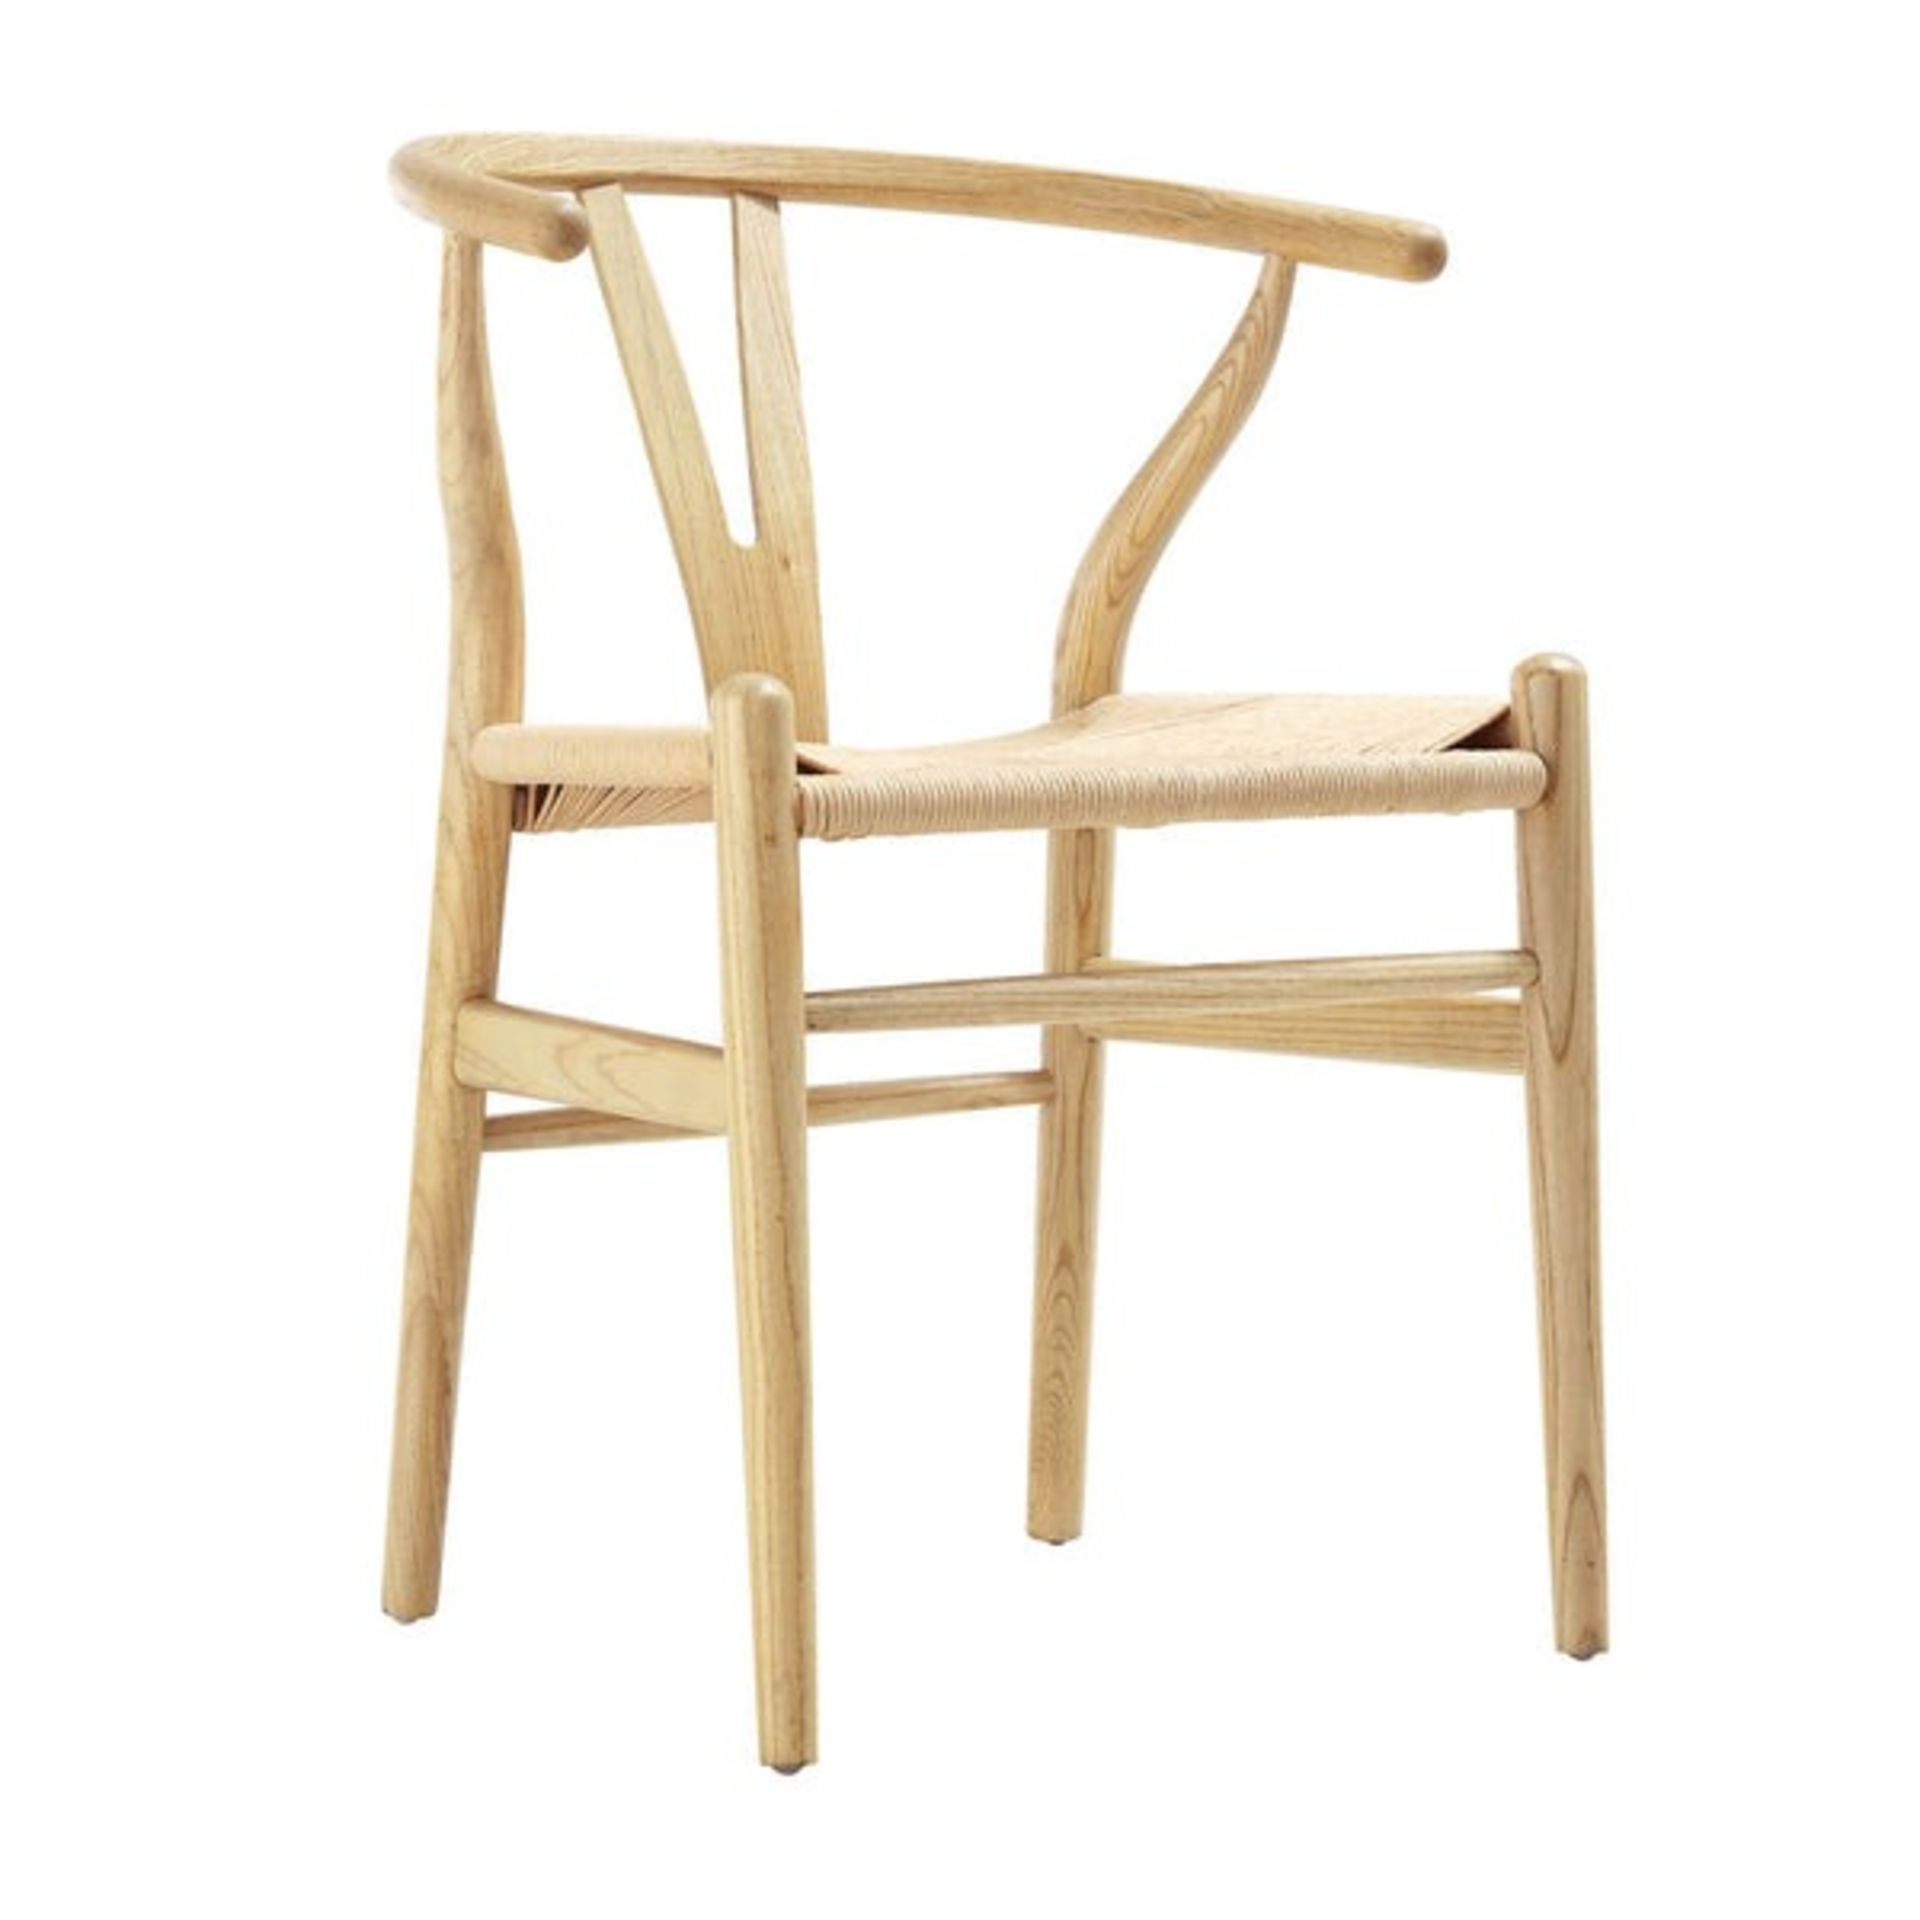 Hansel Wooden Natural Weave Wishbone Dining Chair, Natural Colour Frame (R30) RRP £149.99